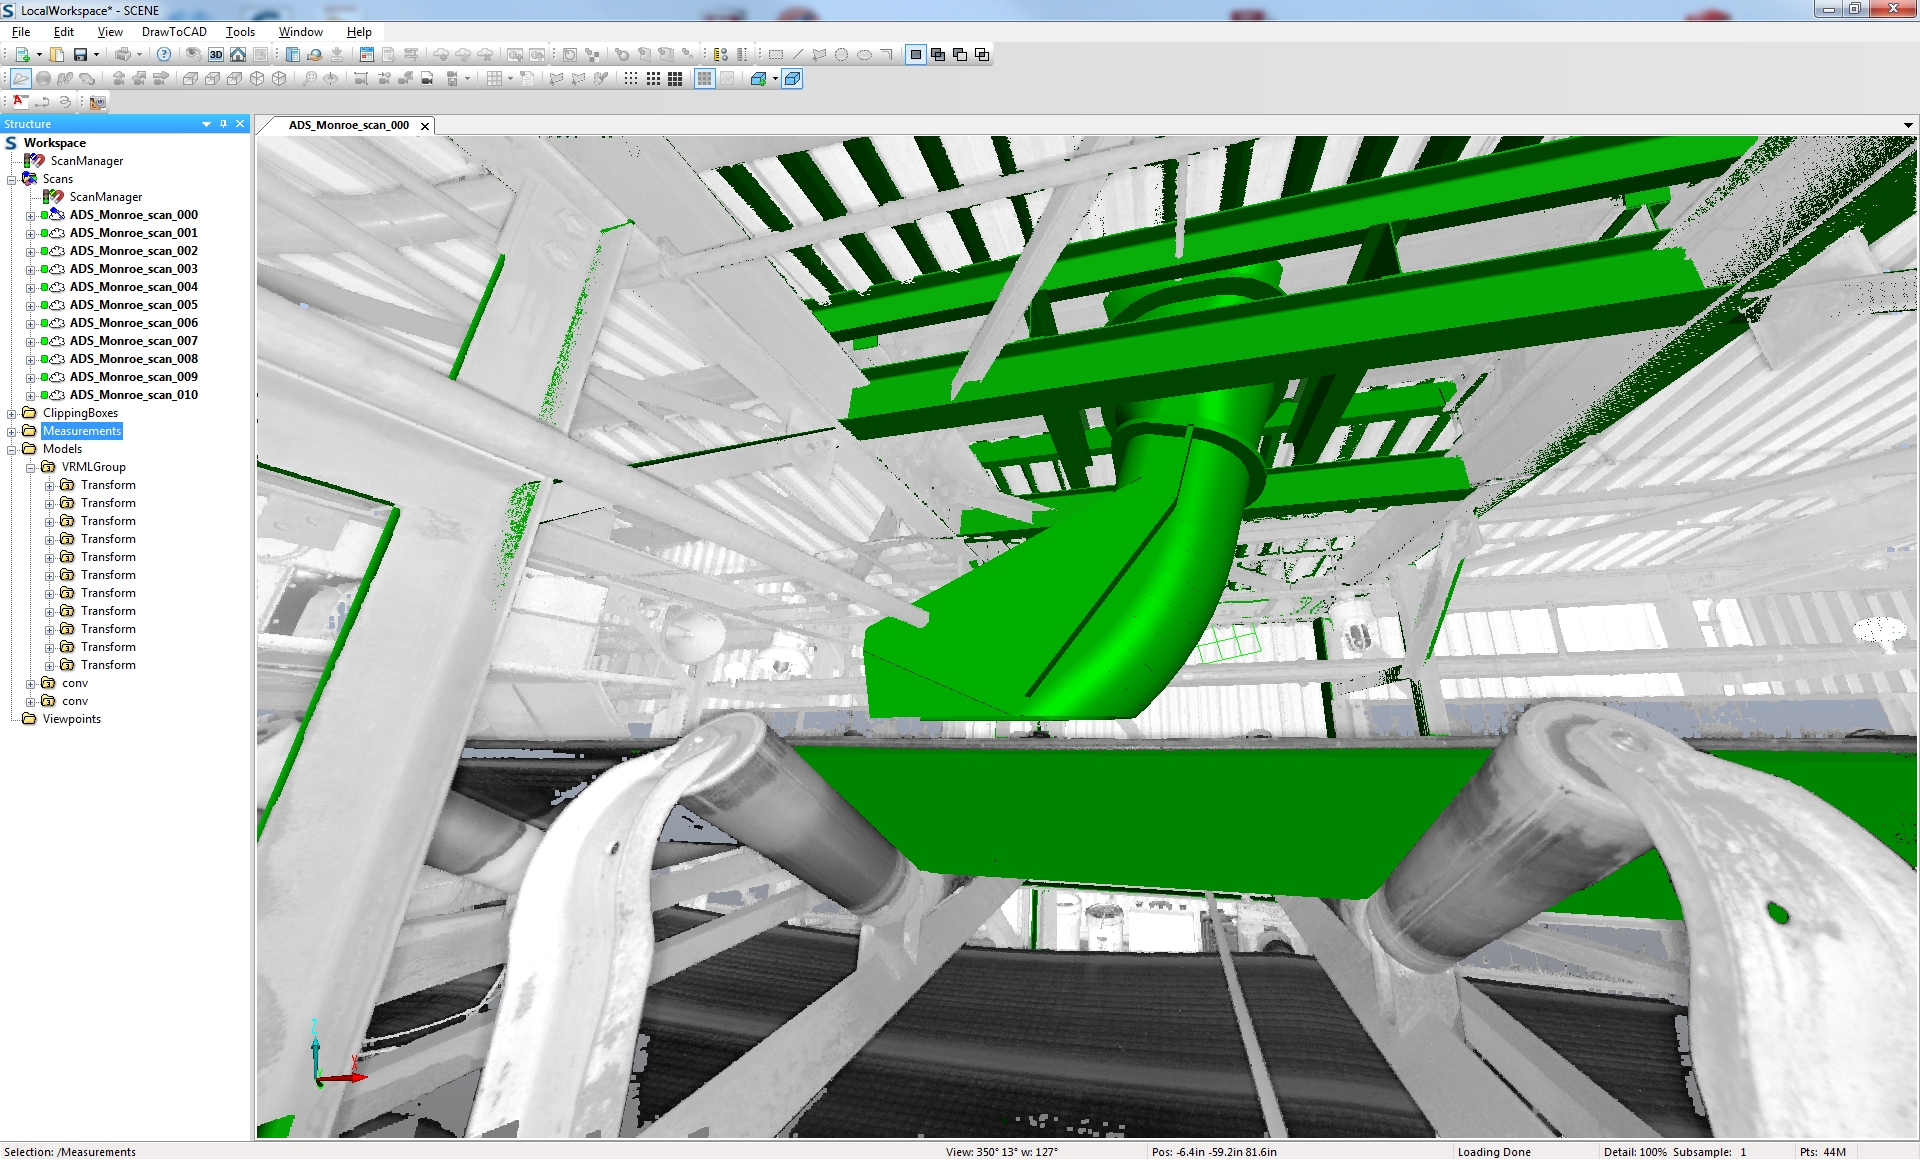 Project 076 Conveyor with SIS cadd model overlayed onto the Scan Image 03.jpg